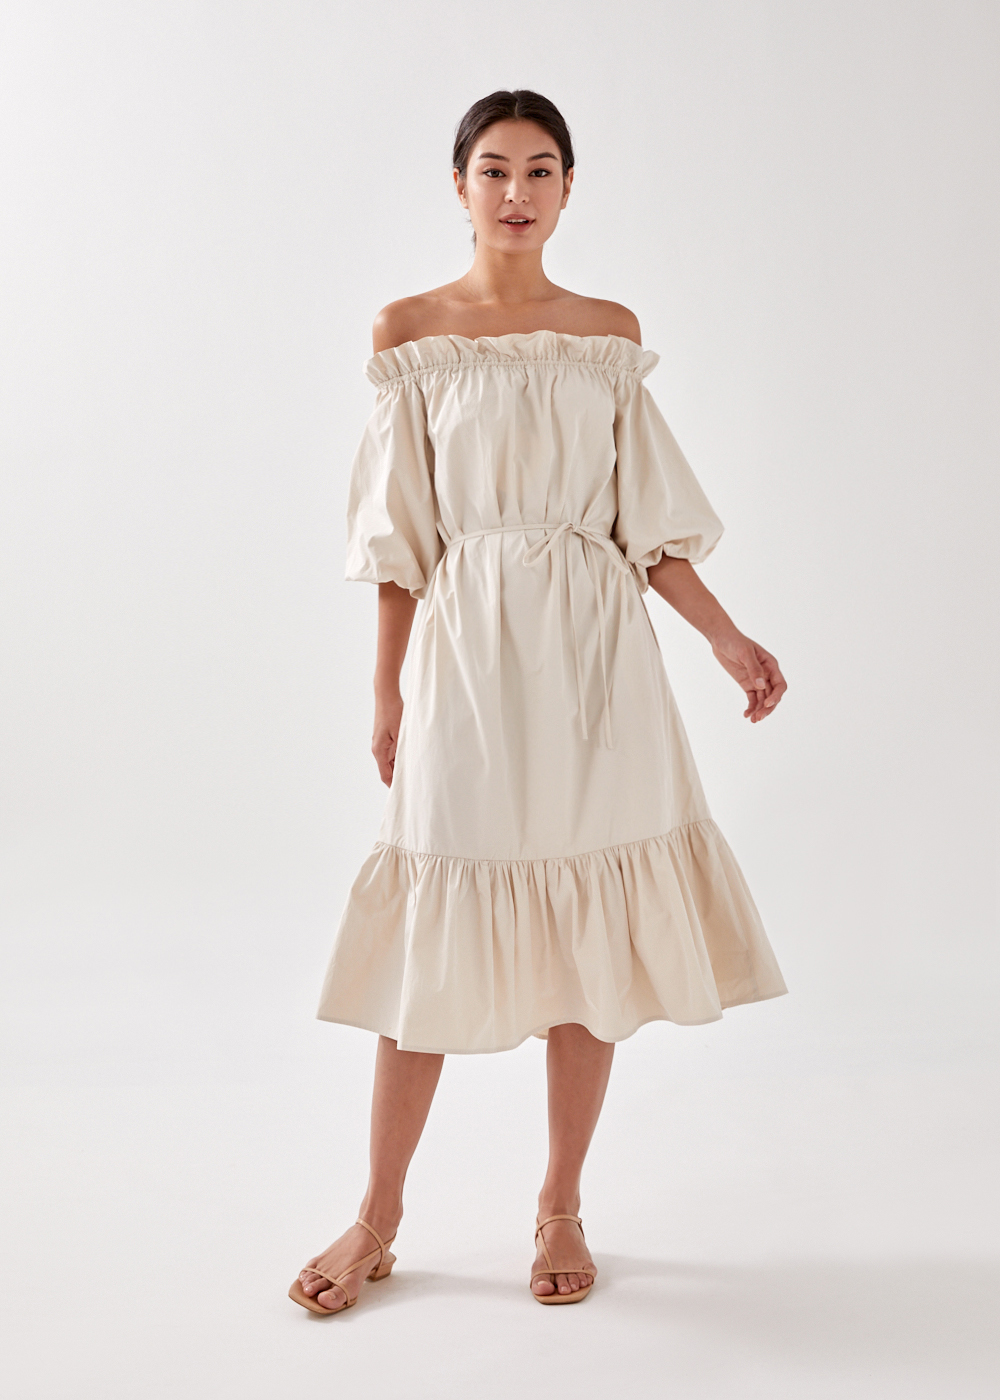 Buy Lucette Puff Sleeve Off Shoulder Midi Dress @ Love, Bonito